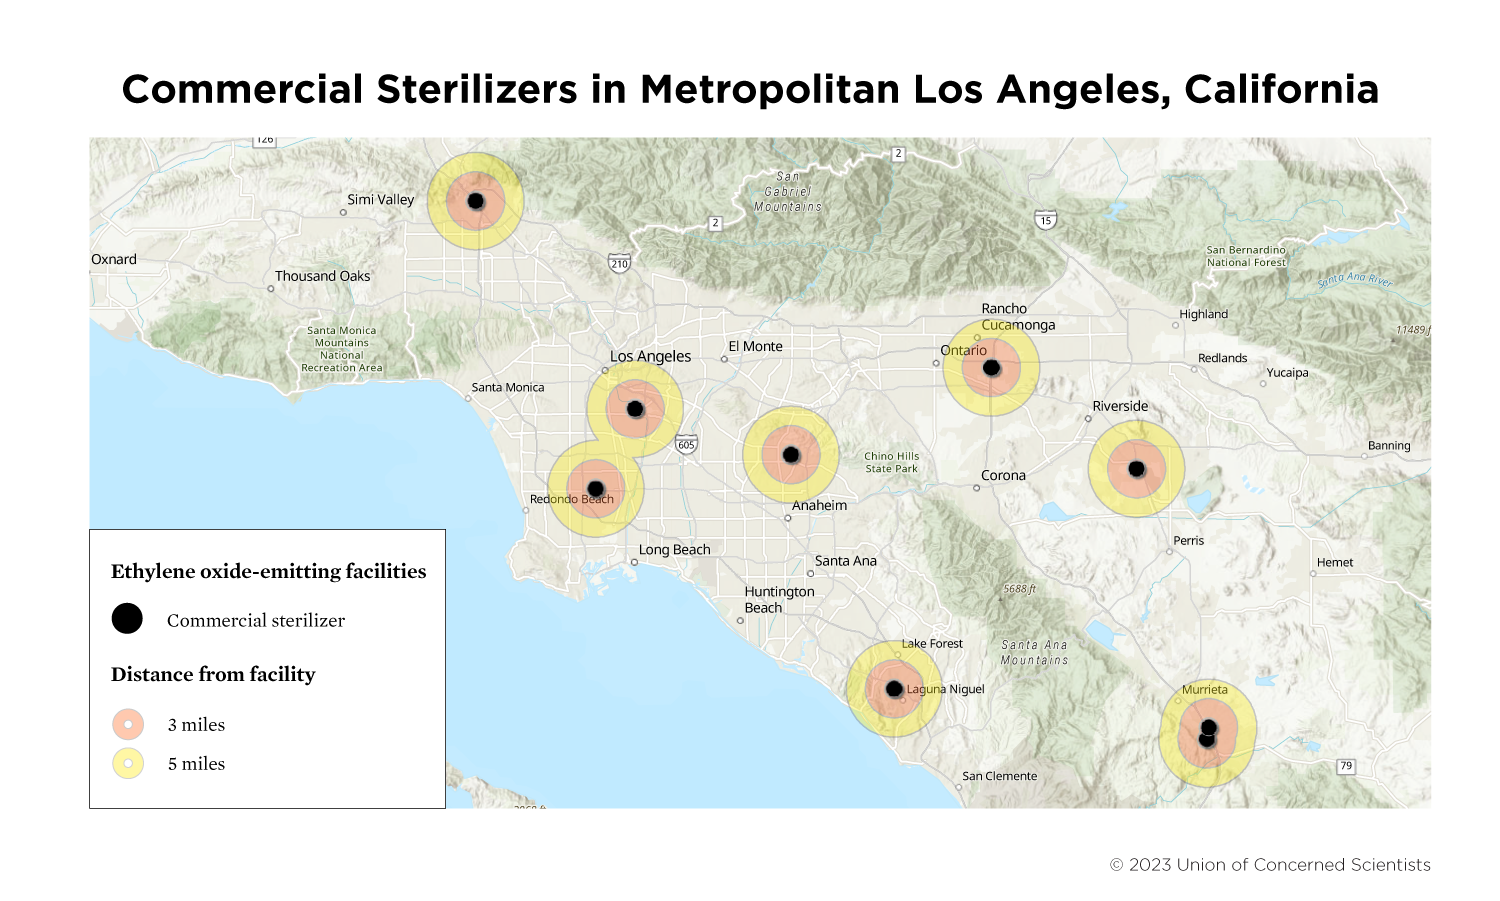 A map of the locations of ethylene oxide-emitting facilities in Los Angeles, California.